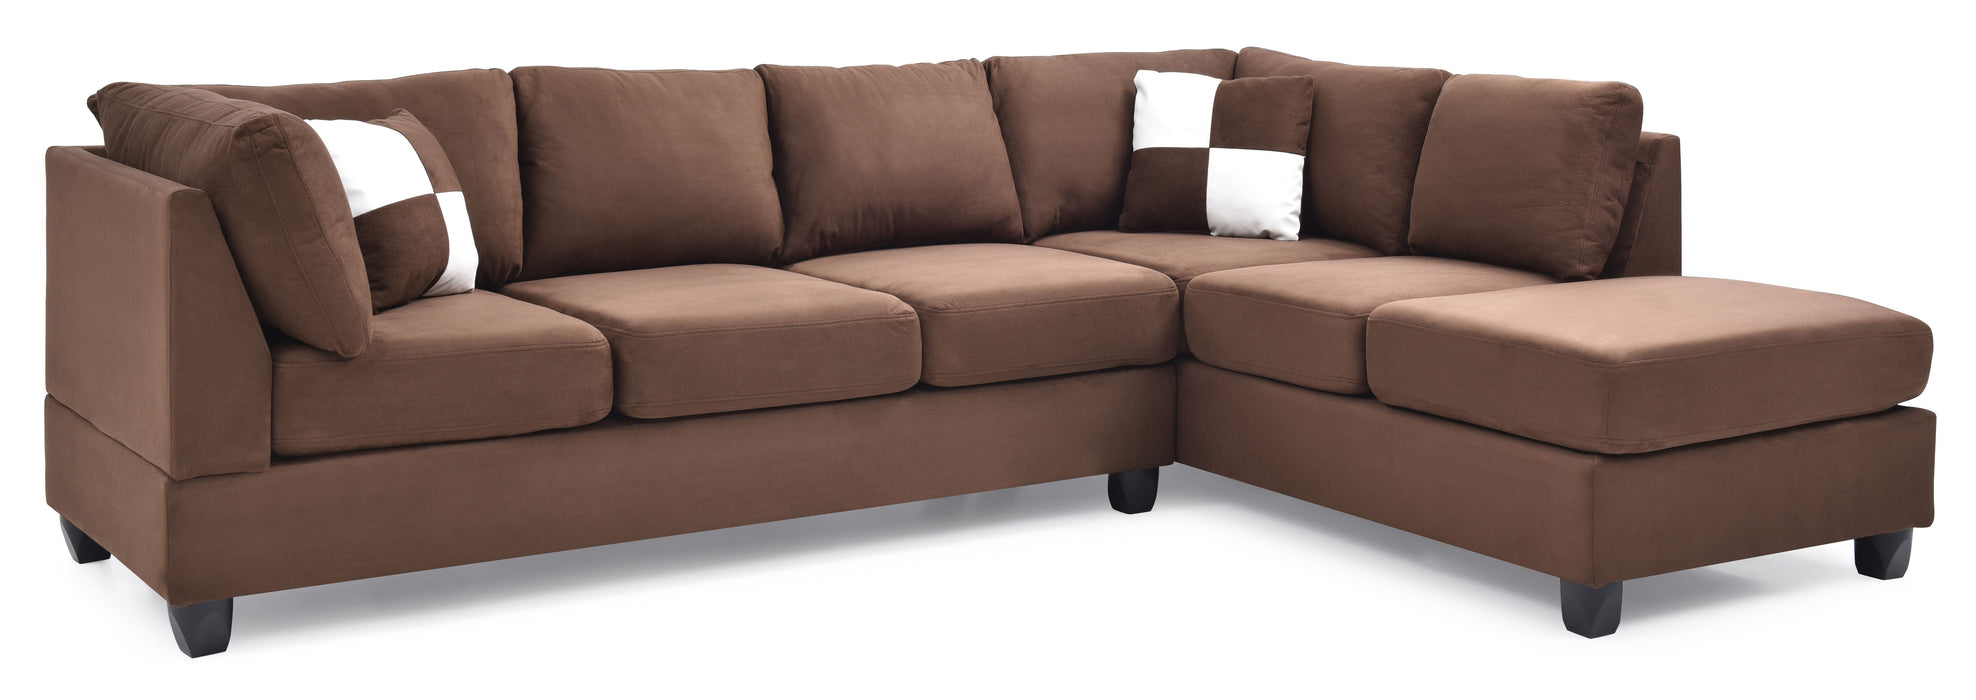 Glory Furniture Malone Sectional (3 Boxes), Chocolate